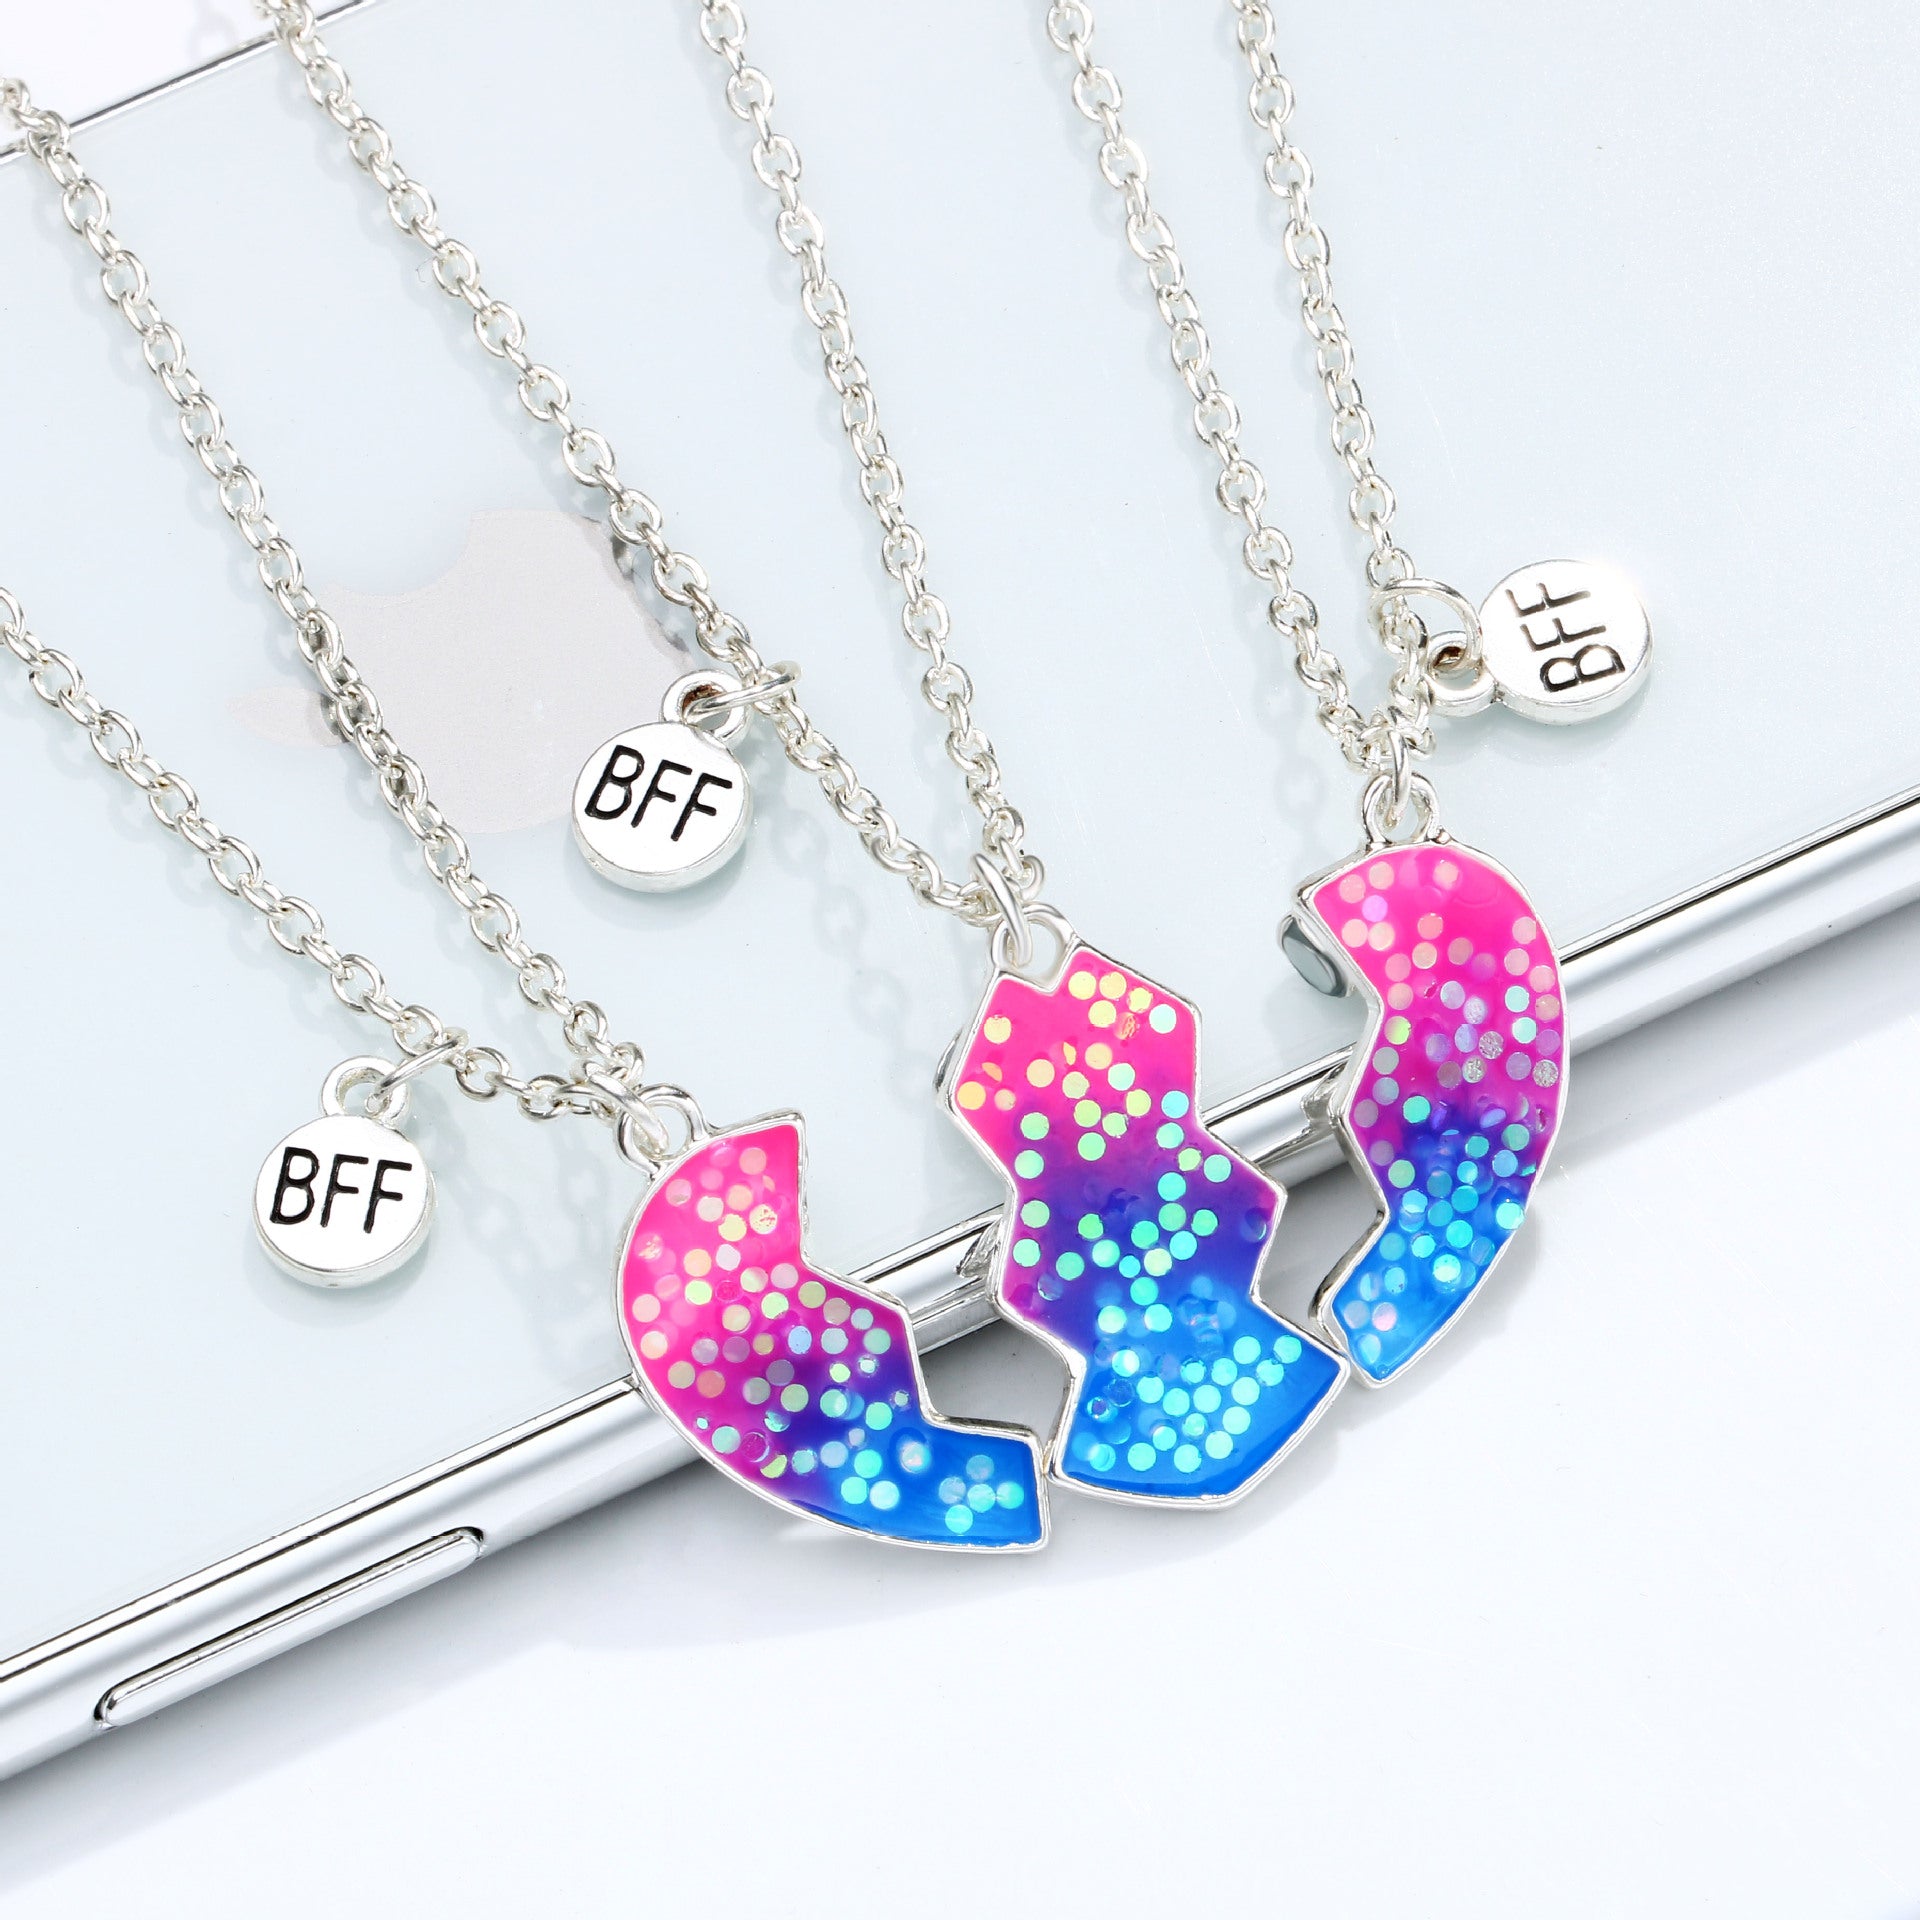 Personalized Magnetic Cute BFF Necklaces Birthday Gift Set